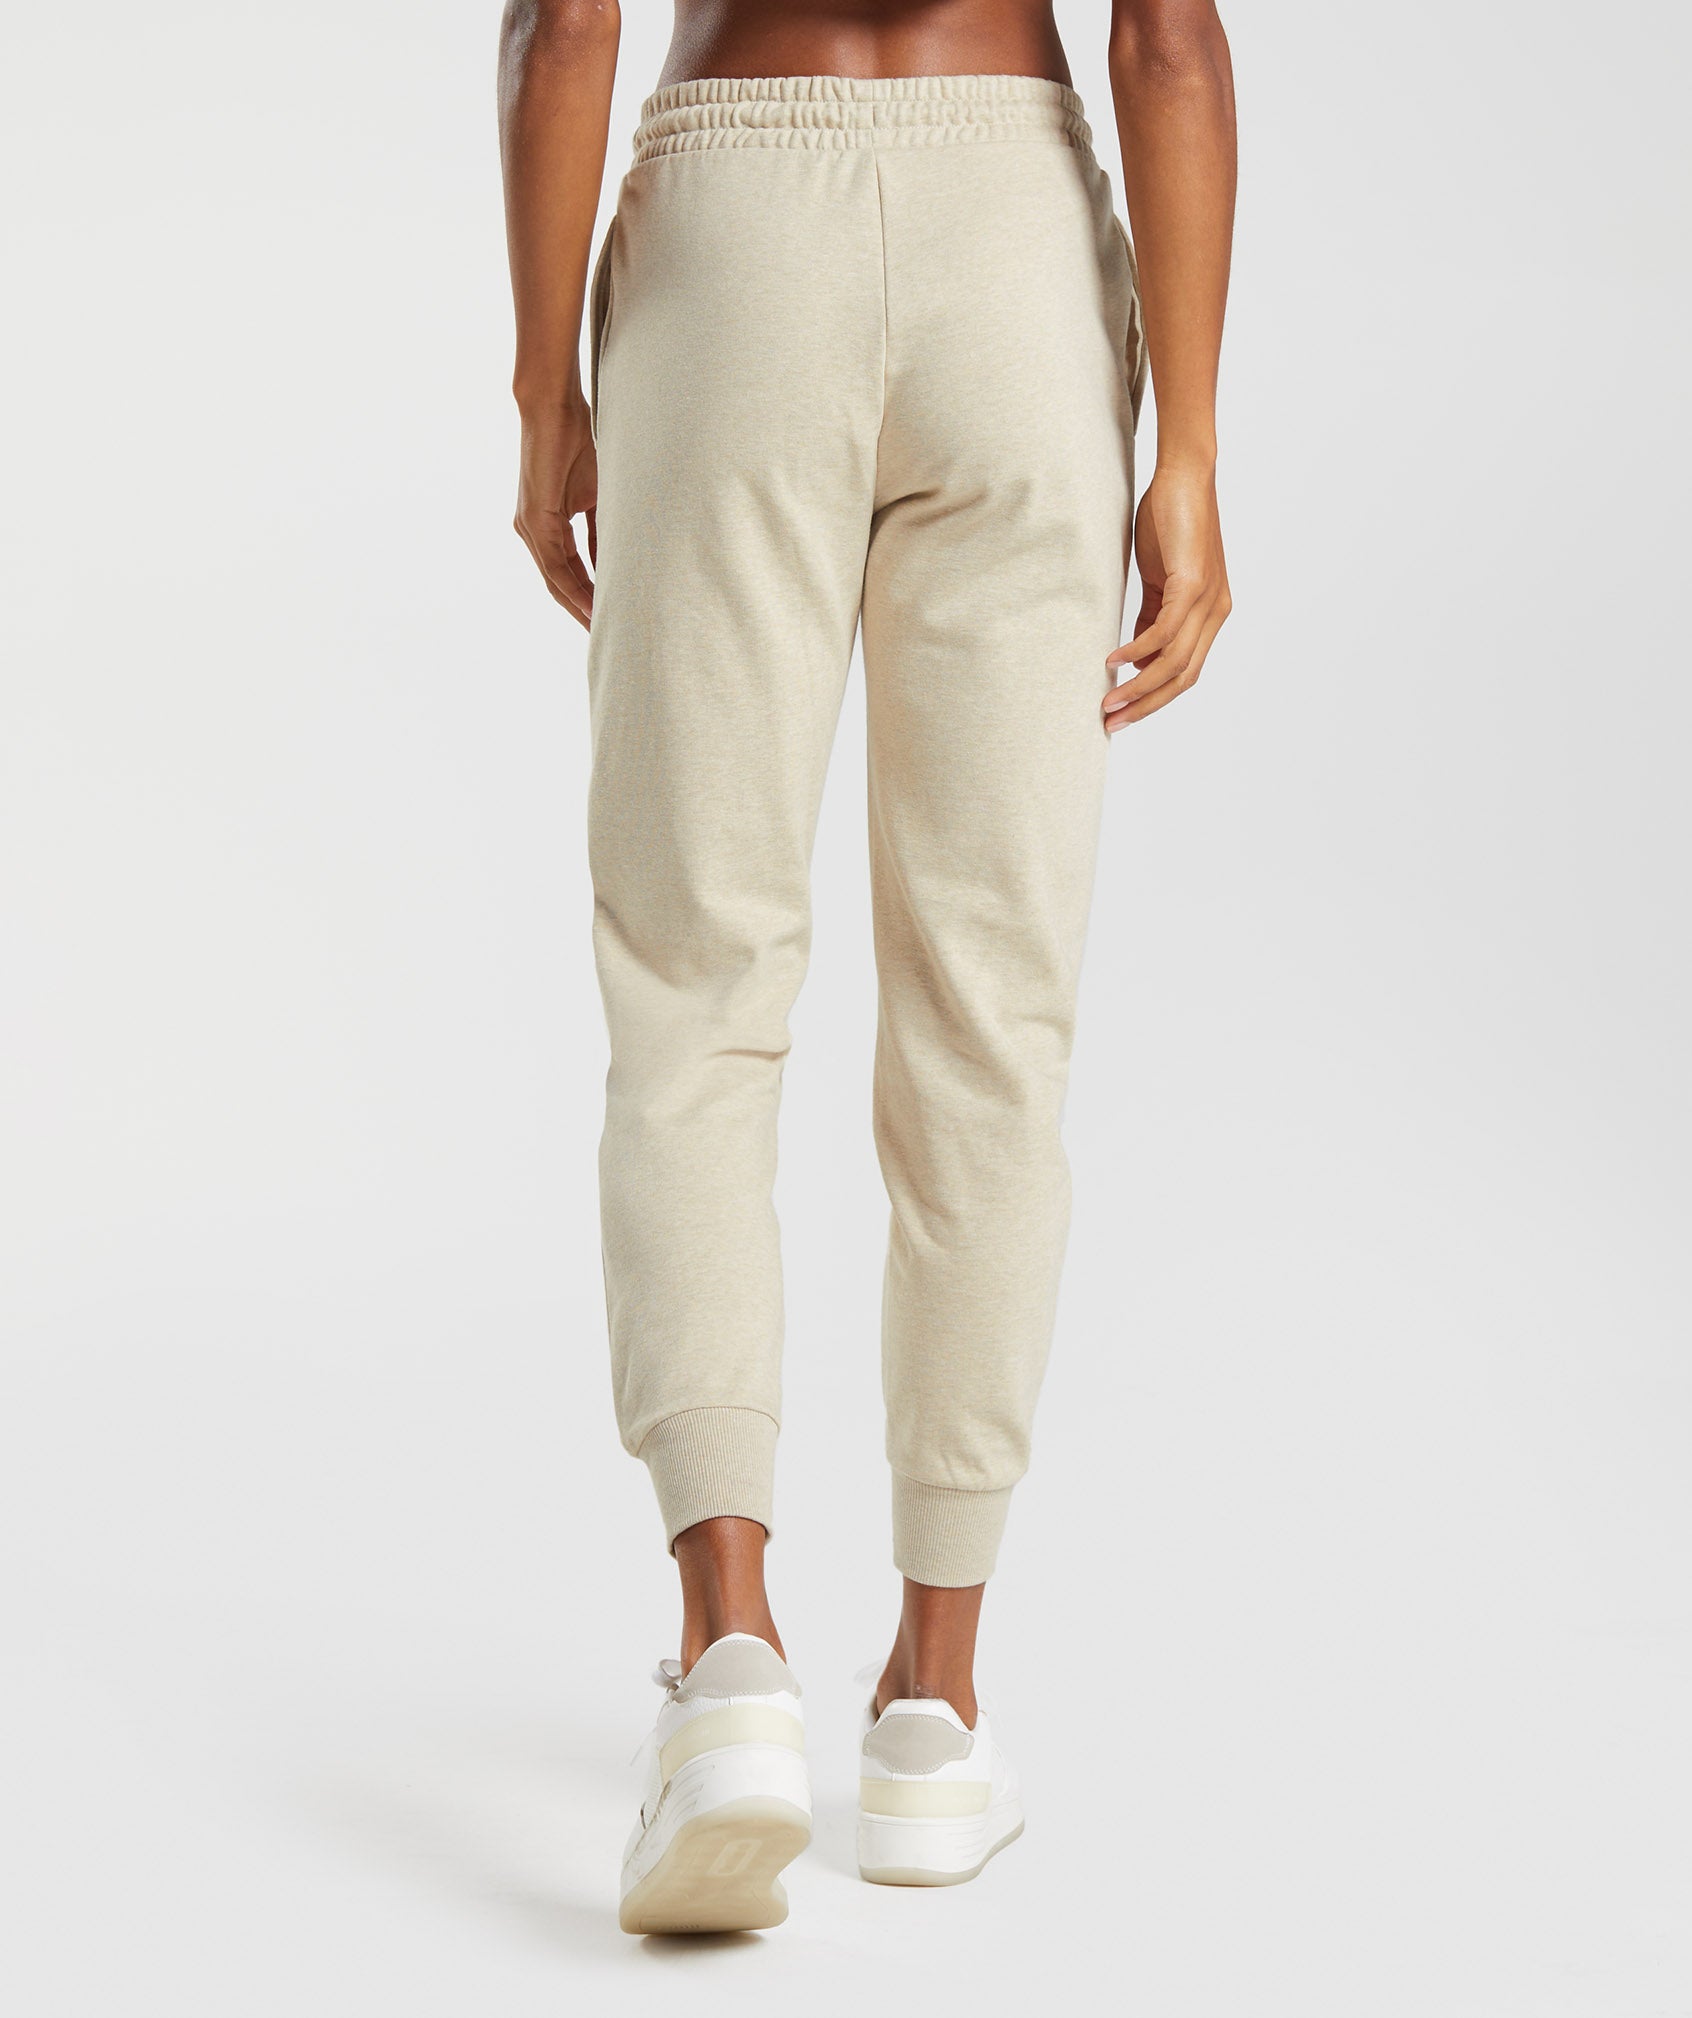 Training Joggers in Sand Marl